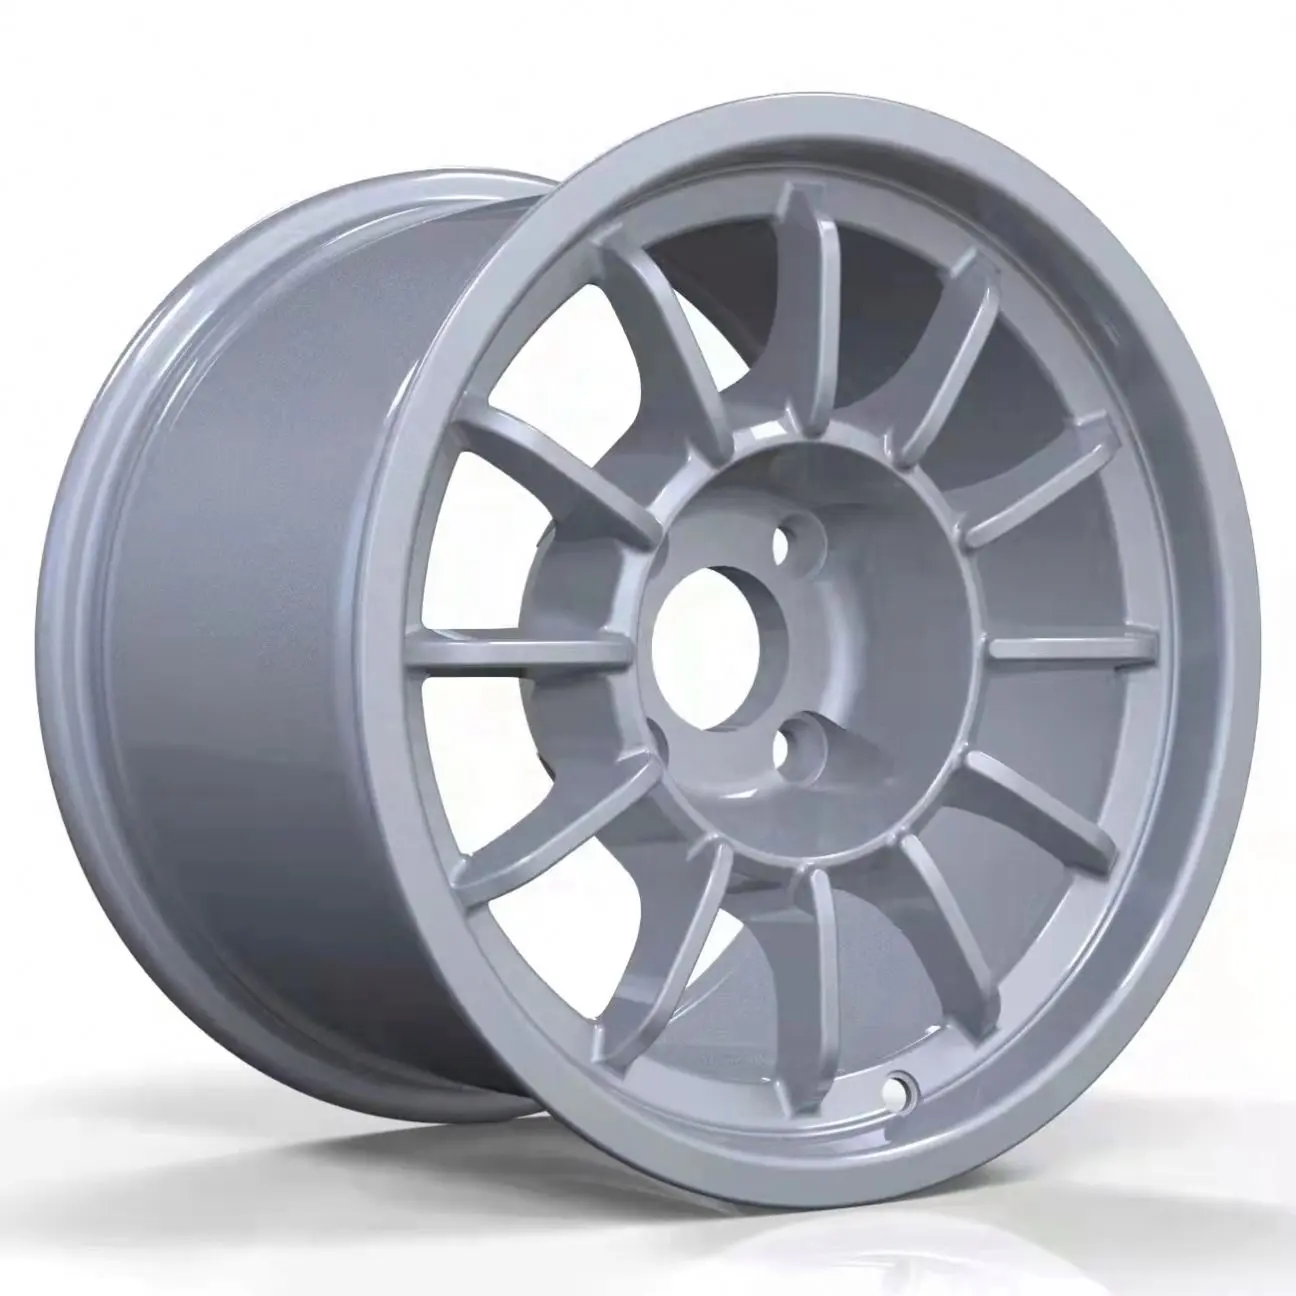 13*7 13*8.5 Racing Wheel Hub Staggered Aluminum Rims 10 Ten SPOKE DESIGN Casting Or Forged Mags Alloy Wheels Racing Car Wheel